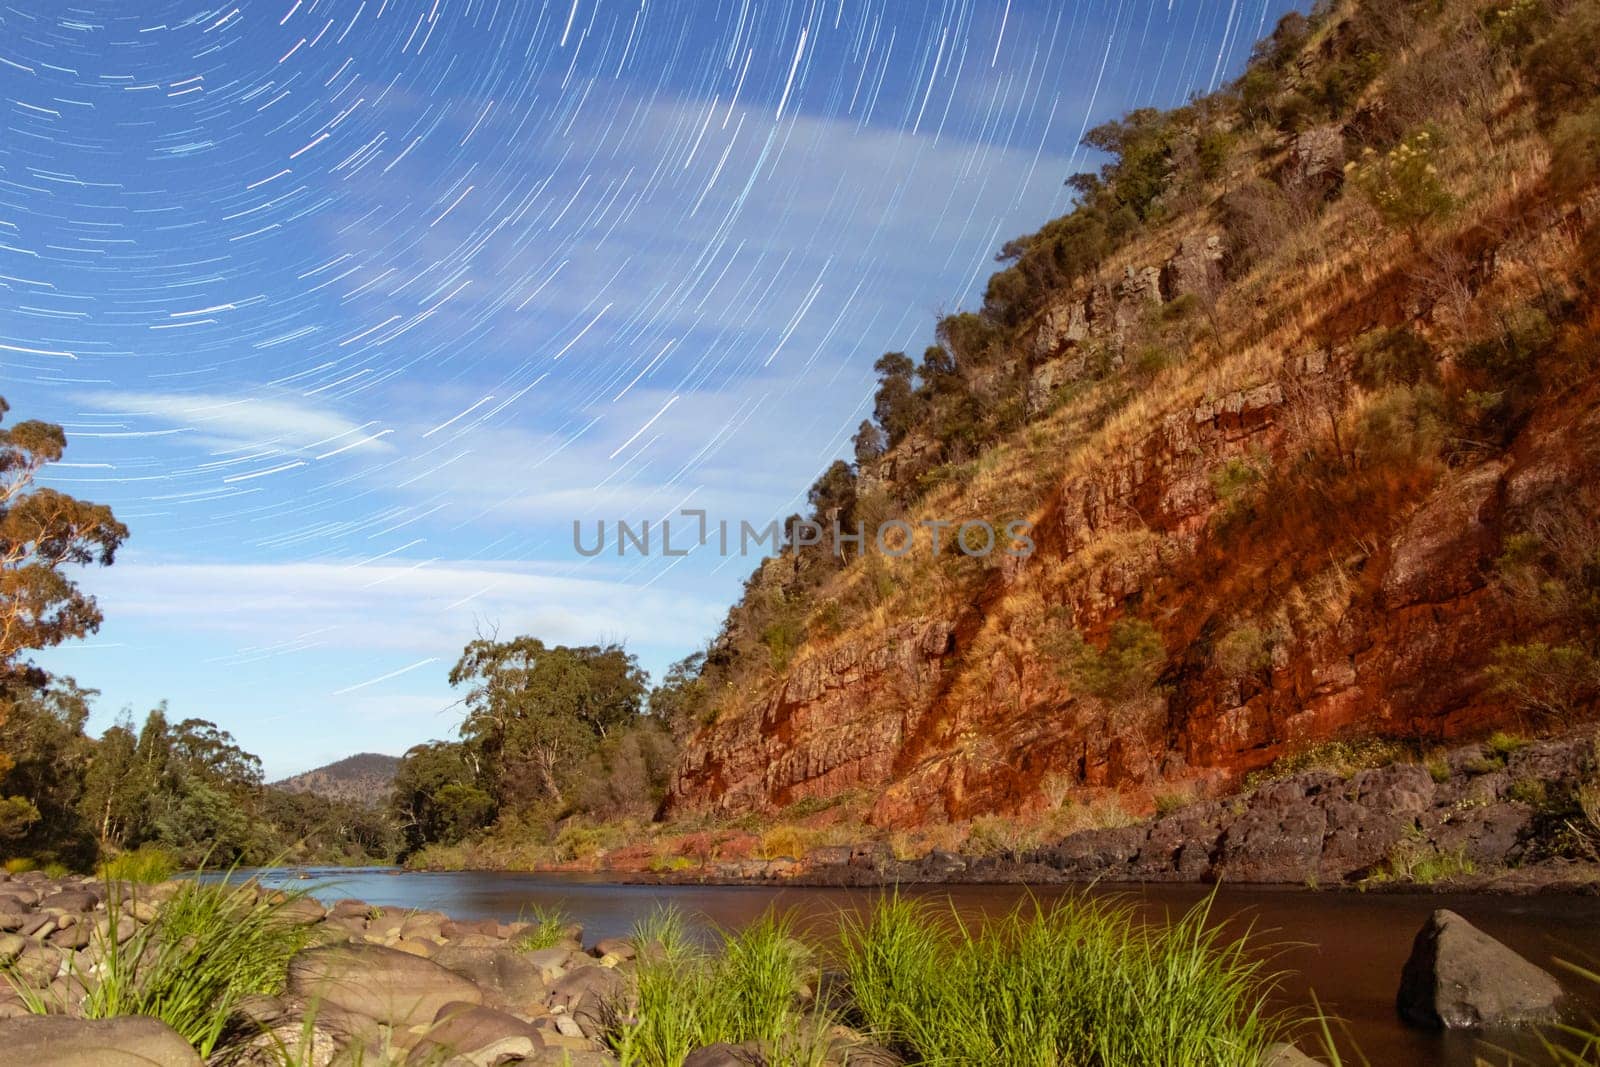 Star trails over red rocks on a river bed by StefanMal